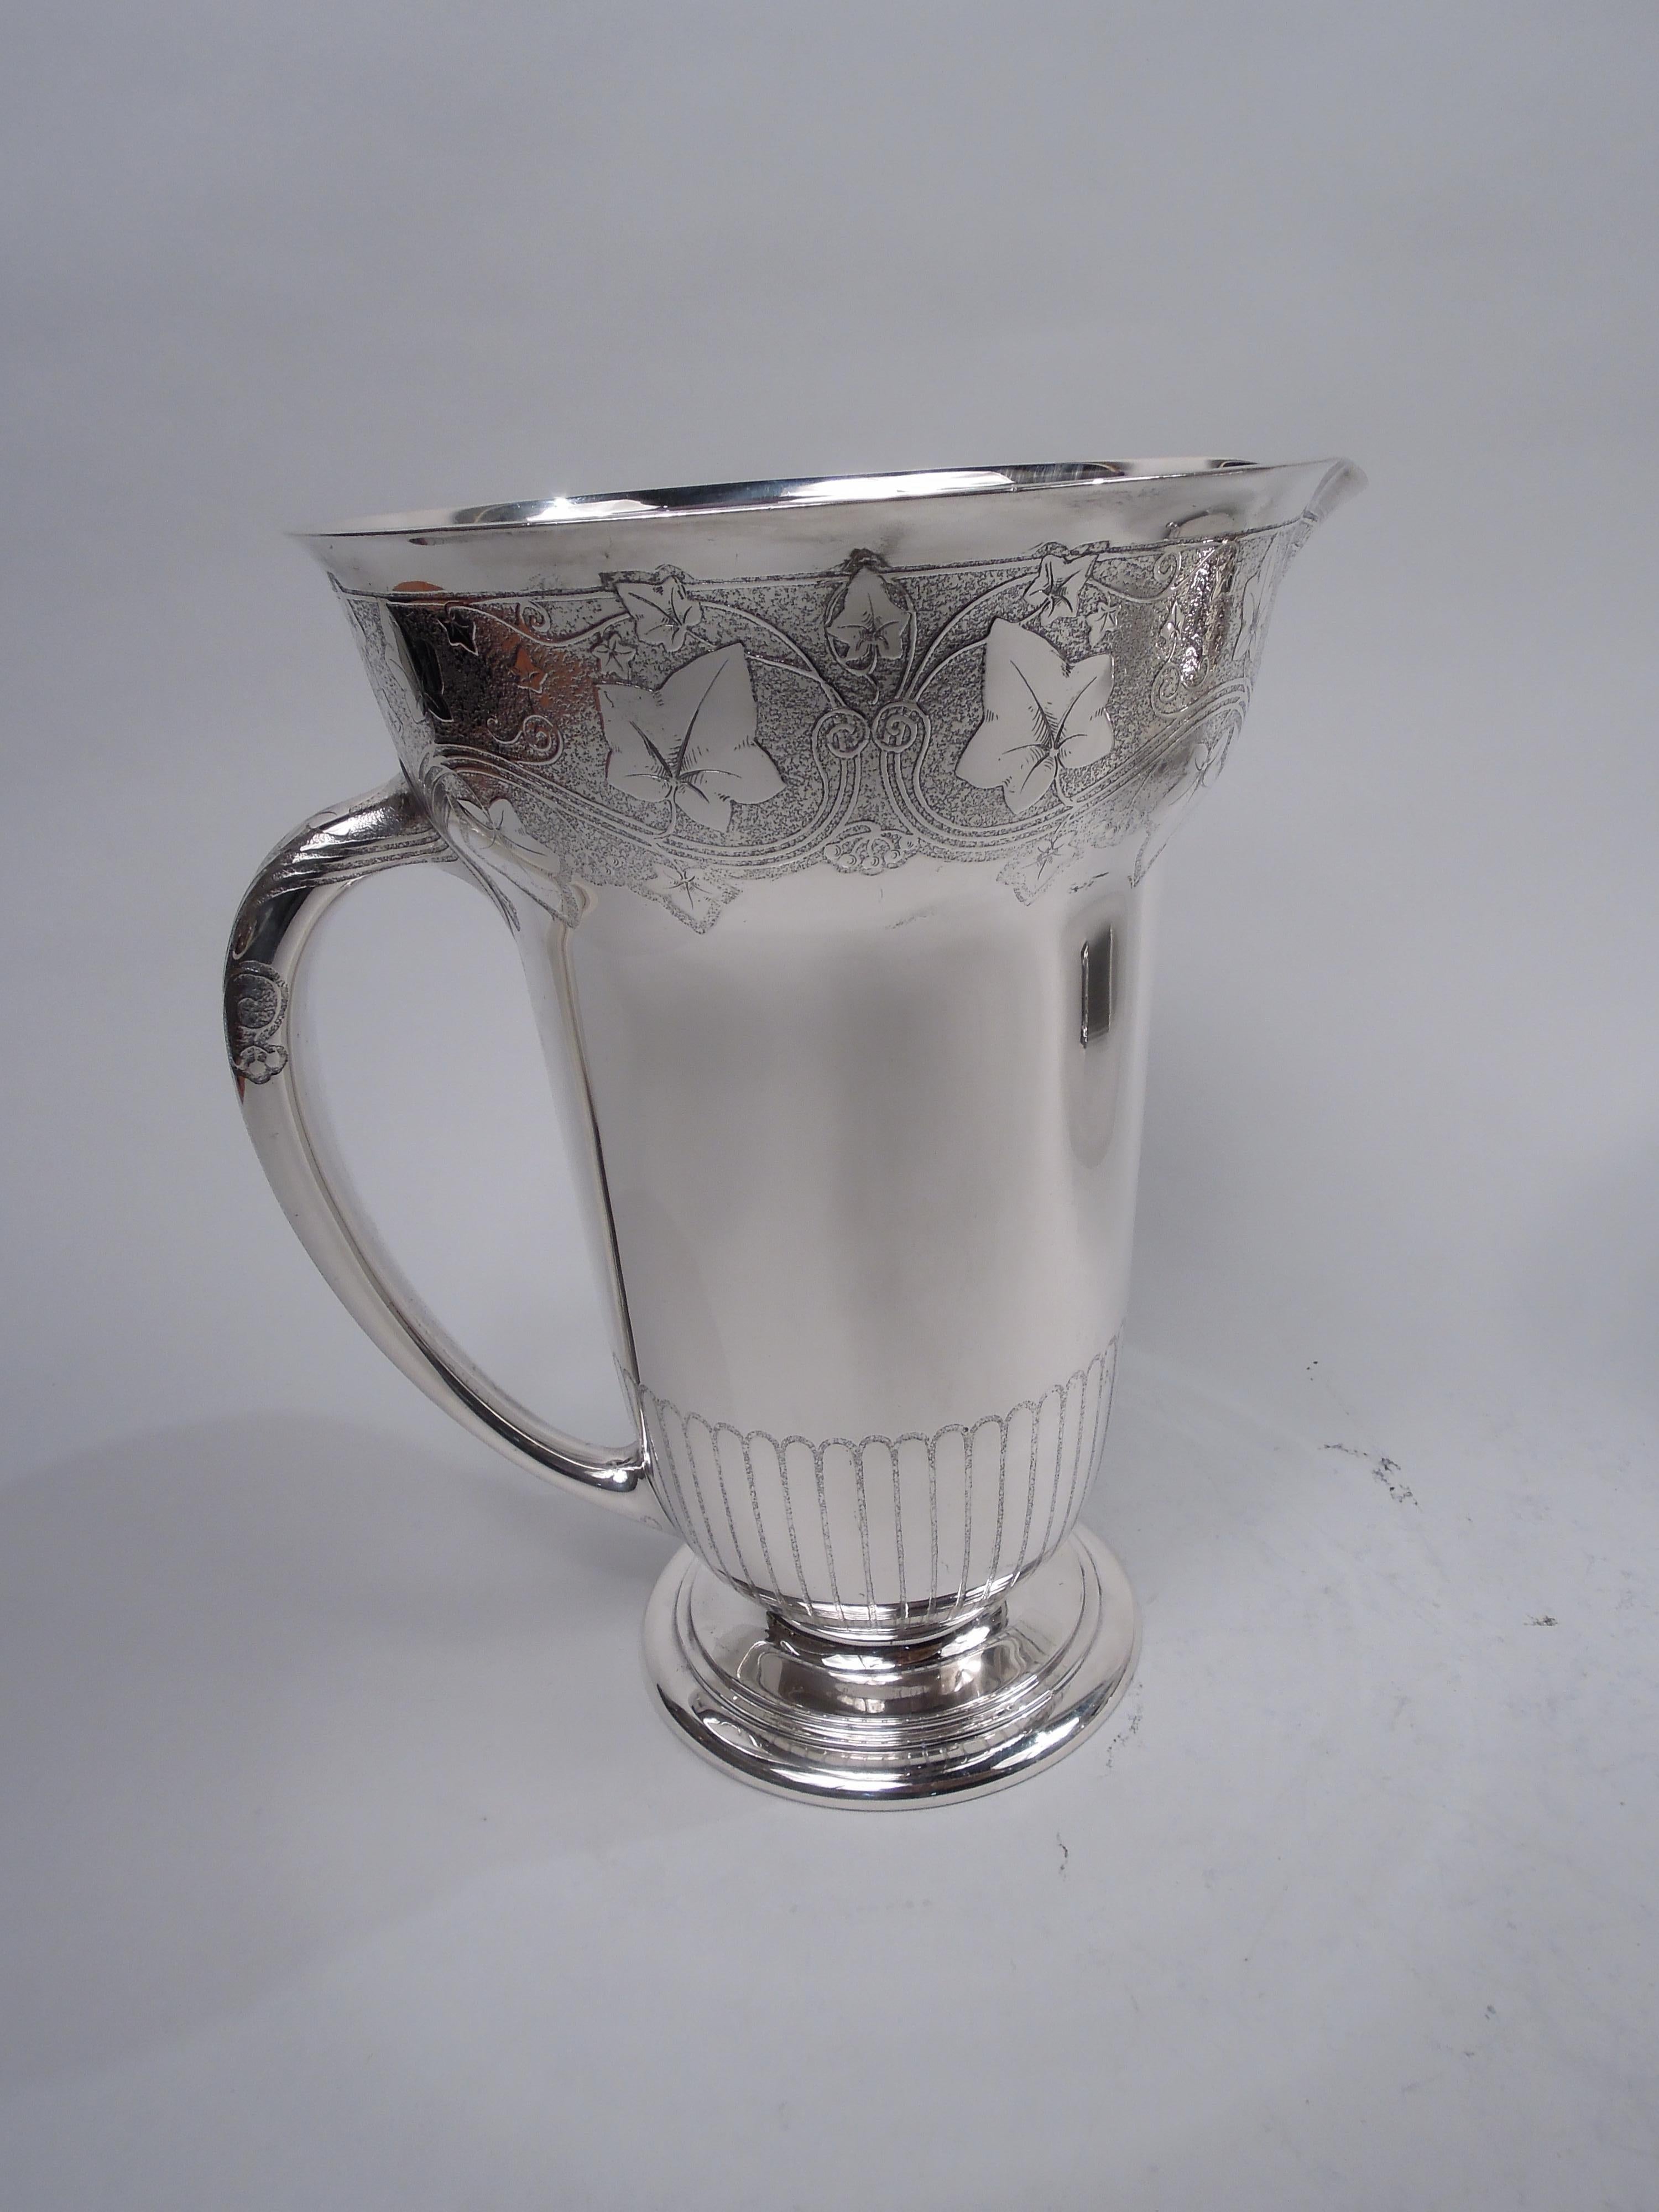 Edwardian Modern Classical sterling silver water pitcher. Made by Tiffany & Co. in New York, ca 1907. Bombe form. Curved and overhanging mouth with lip spout and cylindrical bowl; round and stepped foot and c-scroll handle. Acid-etched ornament: